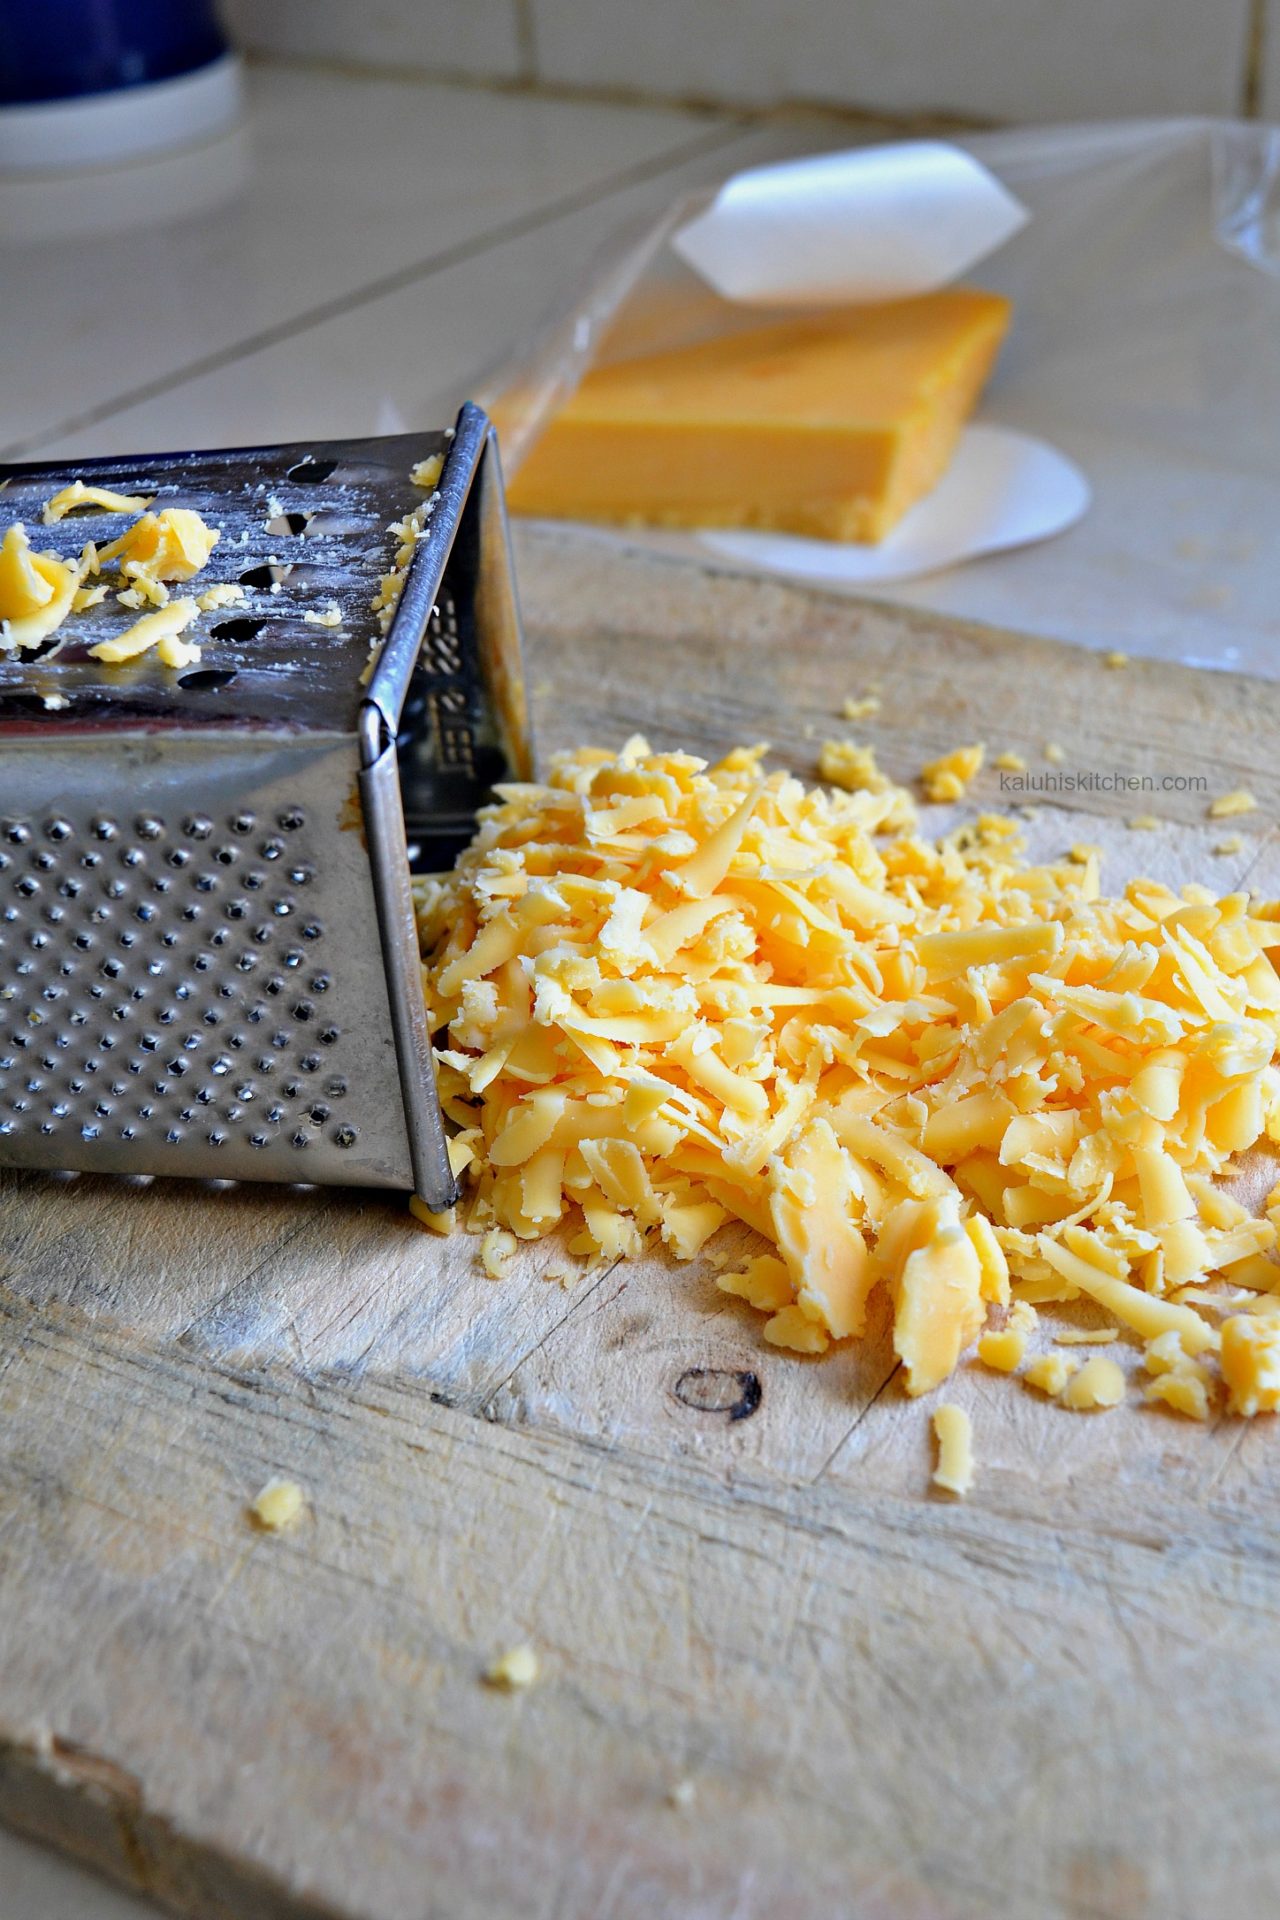 cheddar cheese sauce_homemade grated cheese_cheddar cheese variet available in kenya_kaluhiskichen.com